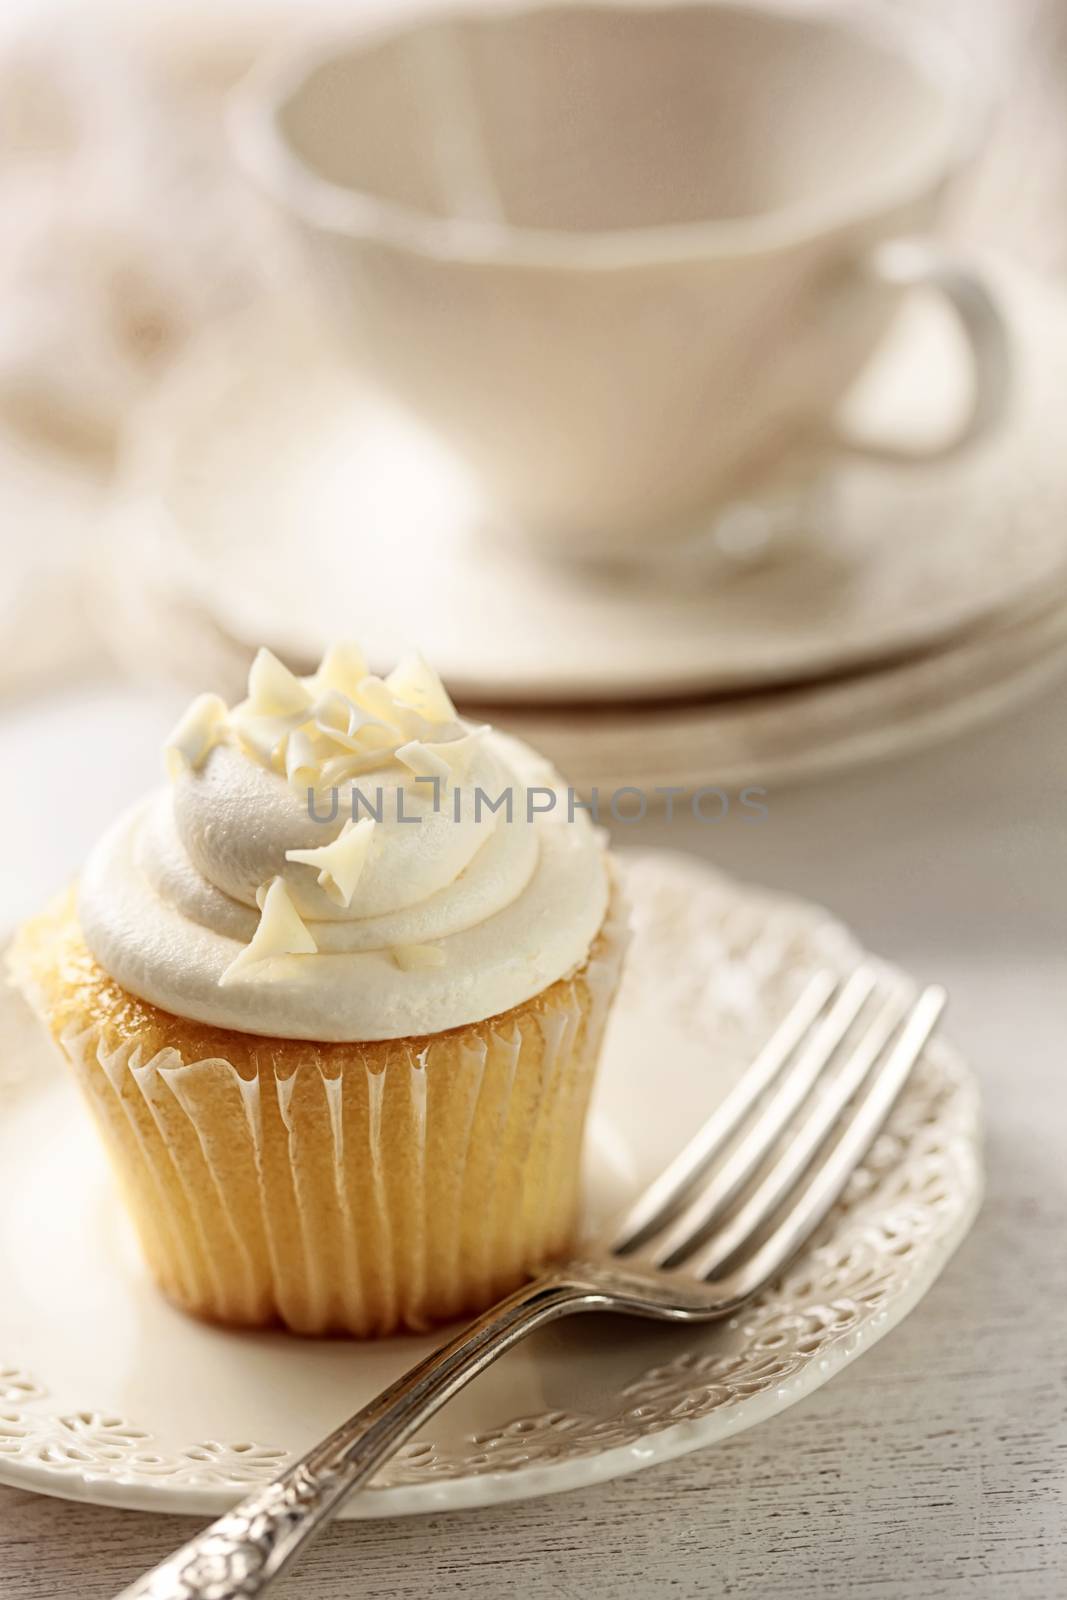 Closeup of vanilla cupcake with tea cup in background